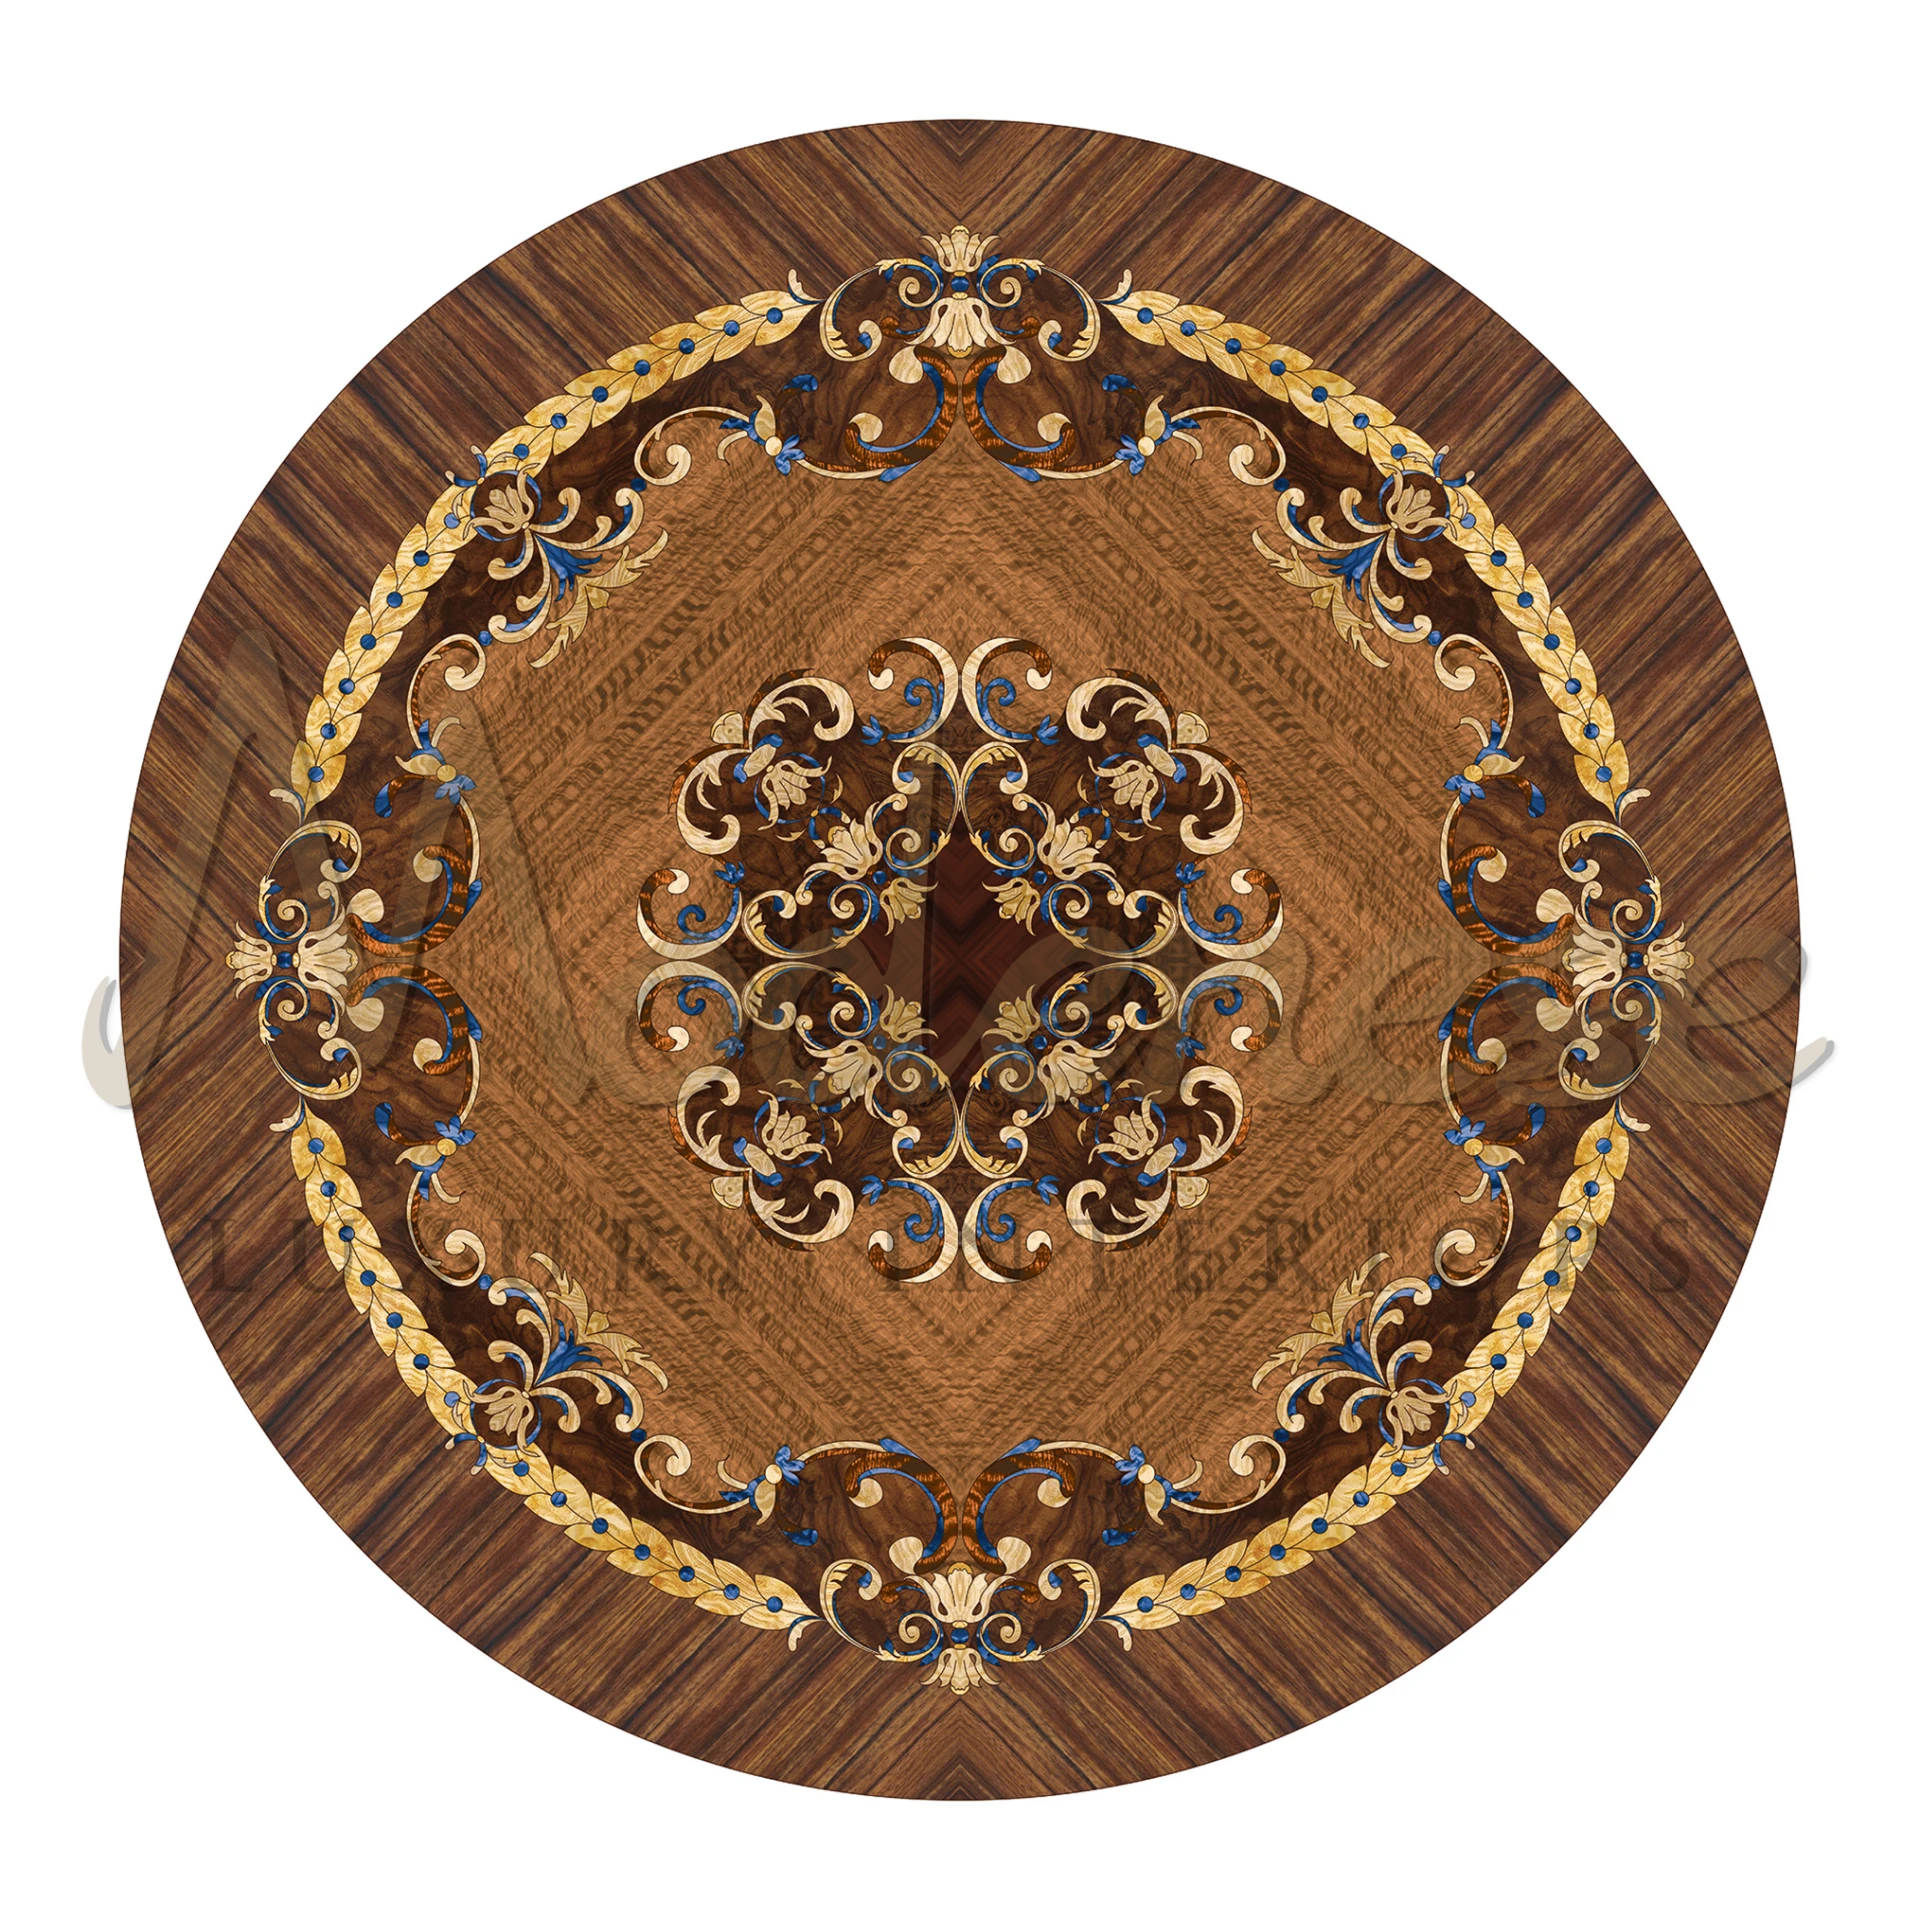 Experience the perfect combination of style and craftsmanship with our round side table featuring exquisite inlay details. Designed to impress, this stunning piece adds a sense of sophistication to your living space.